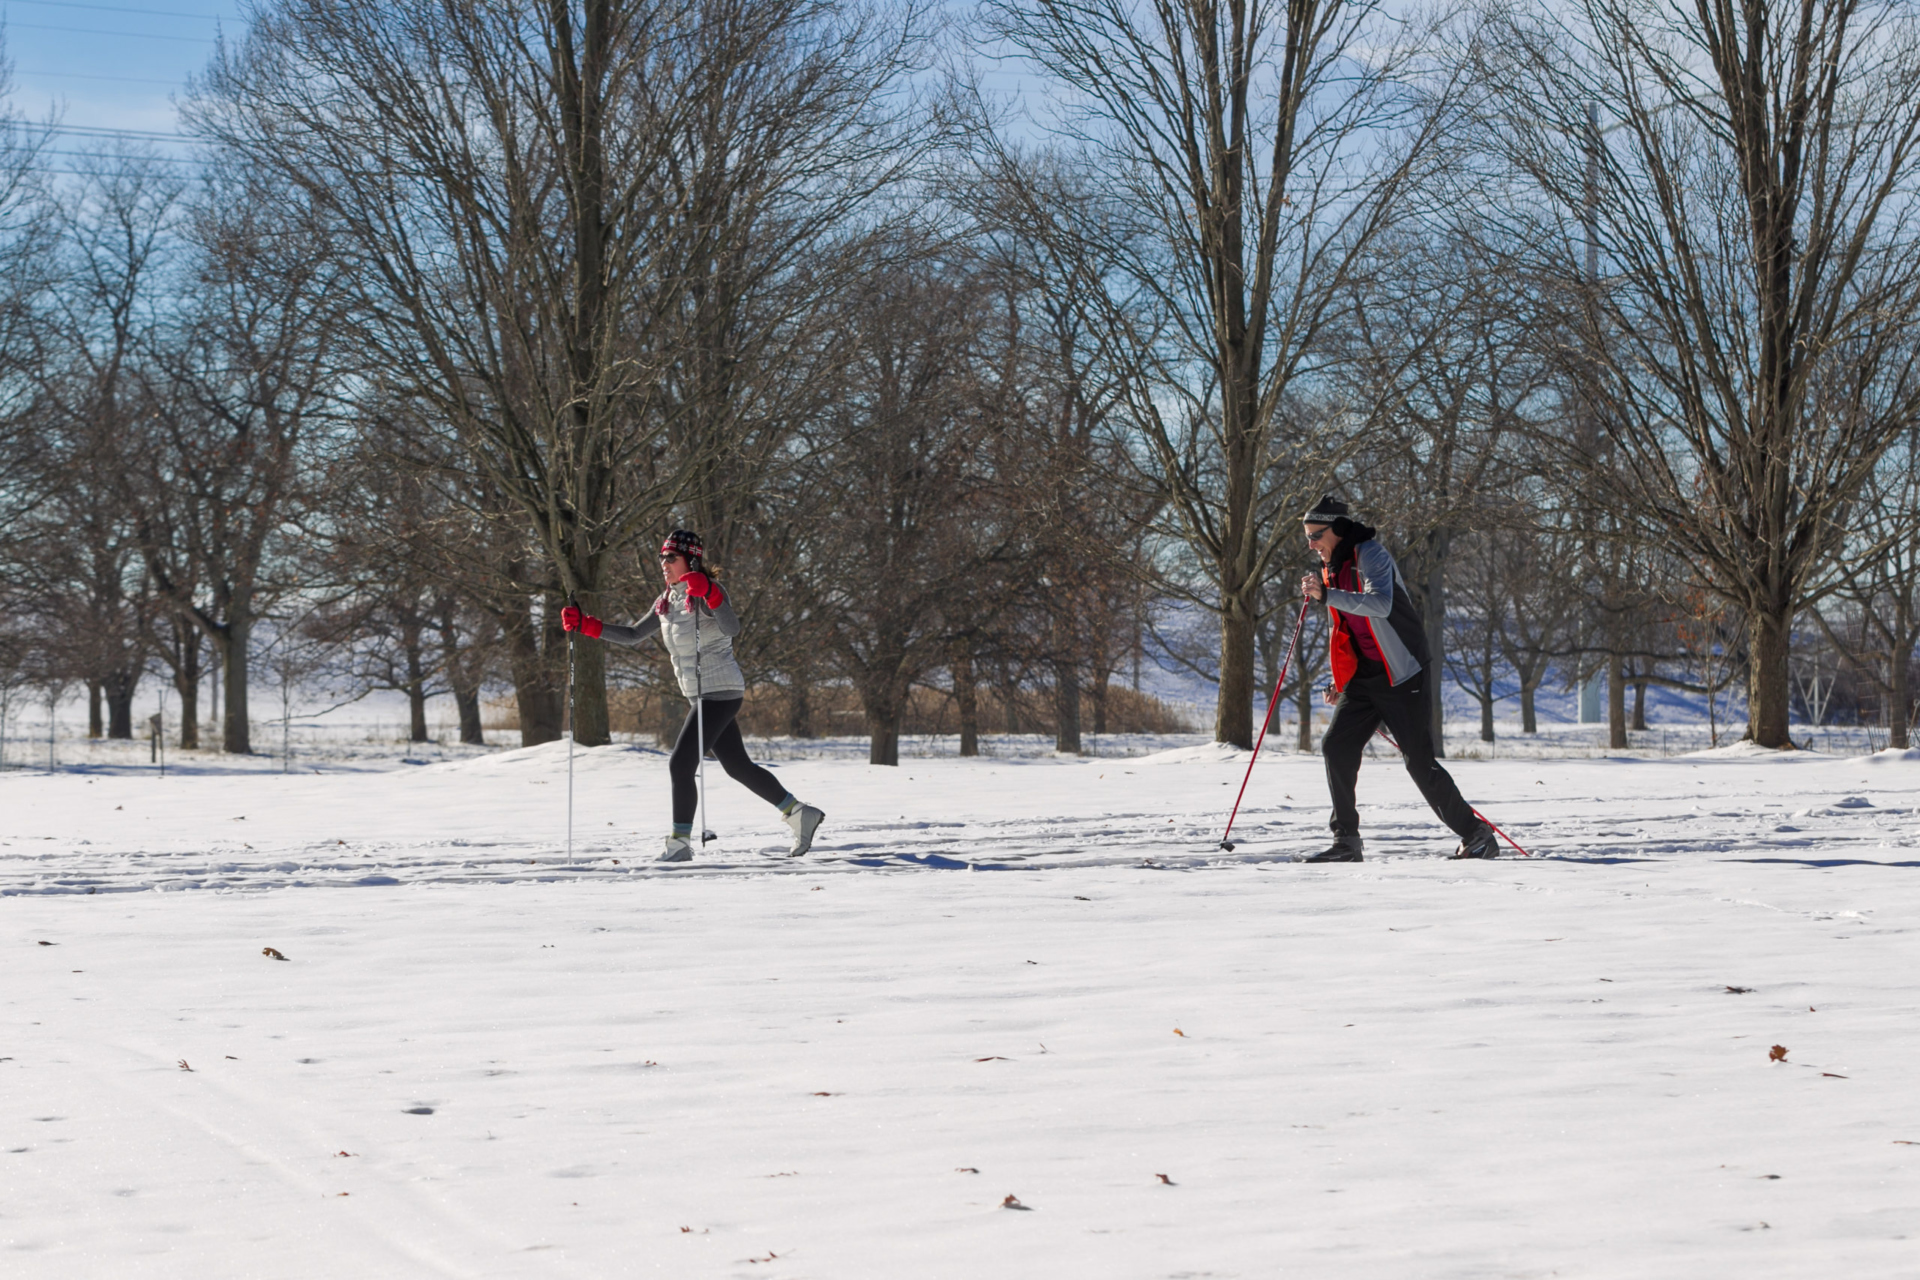 Two adults cross country skiing in an open area surrounded by trees in winter.